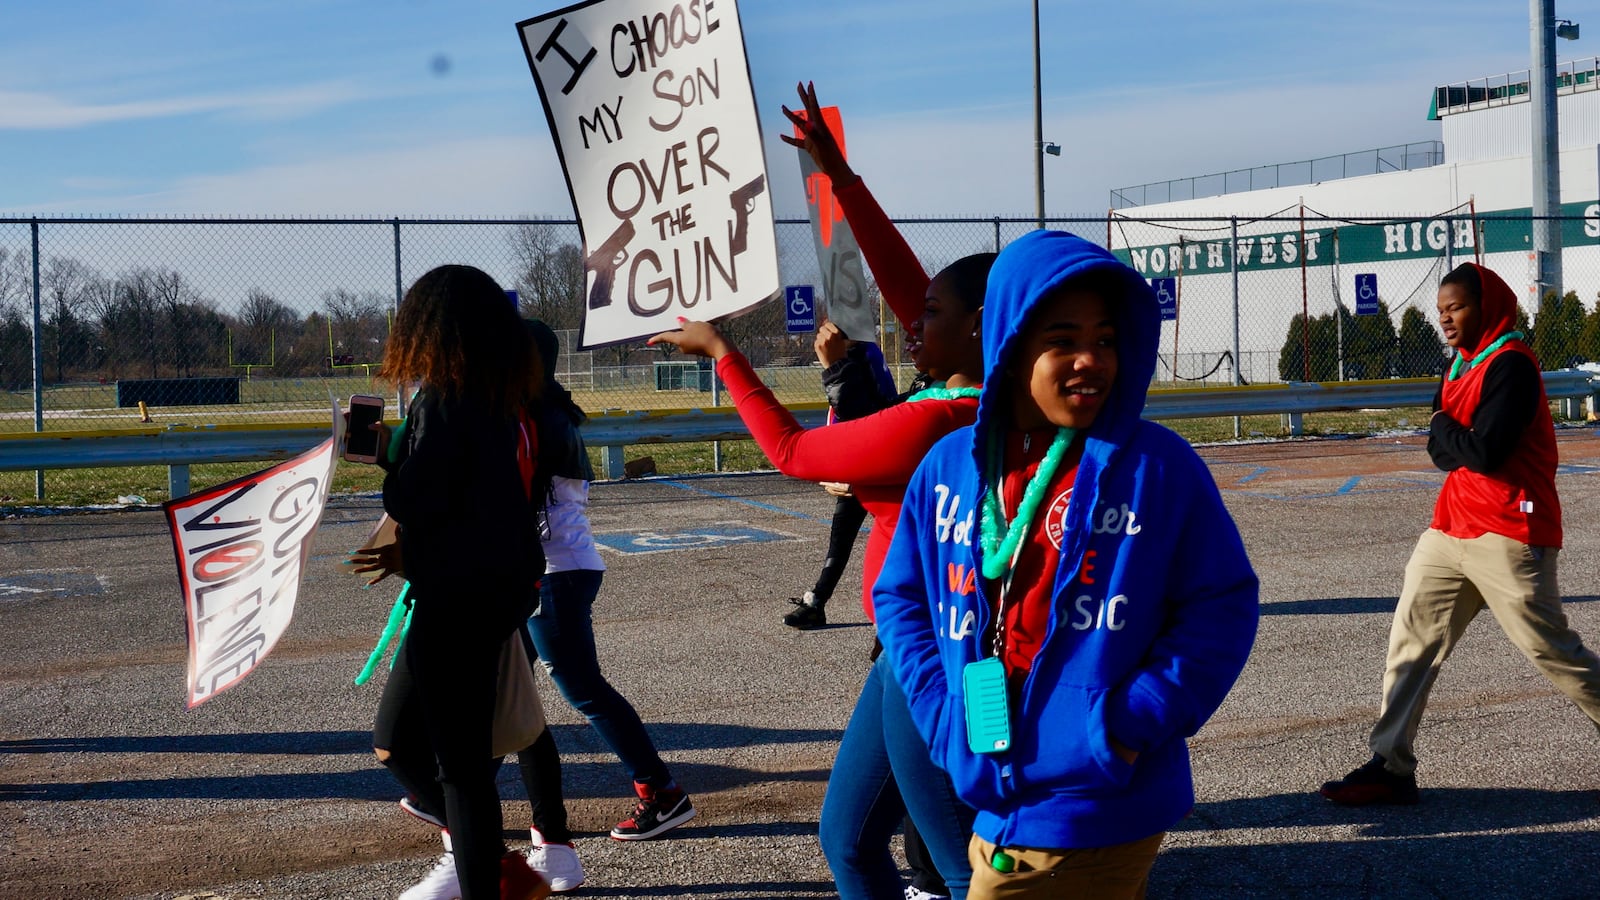 Students in Indianapolis participate in the National School Walkout on March 14. This Saturday, students in the Memphis area will join a related March for Our Lives.